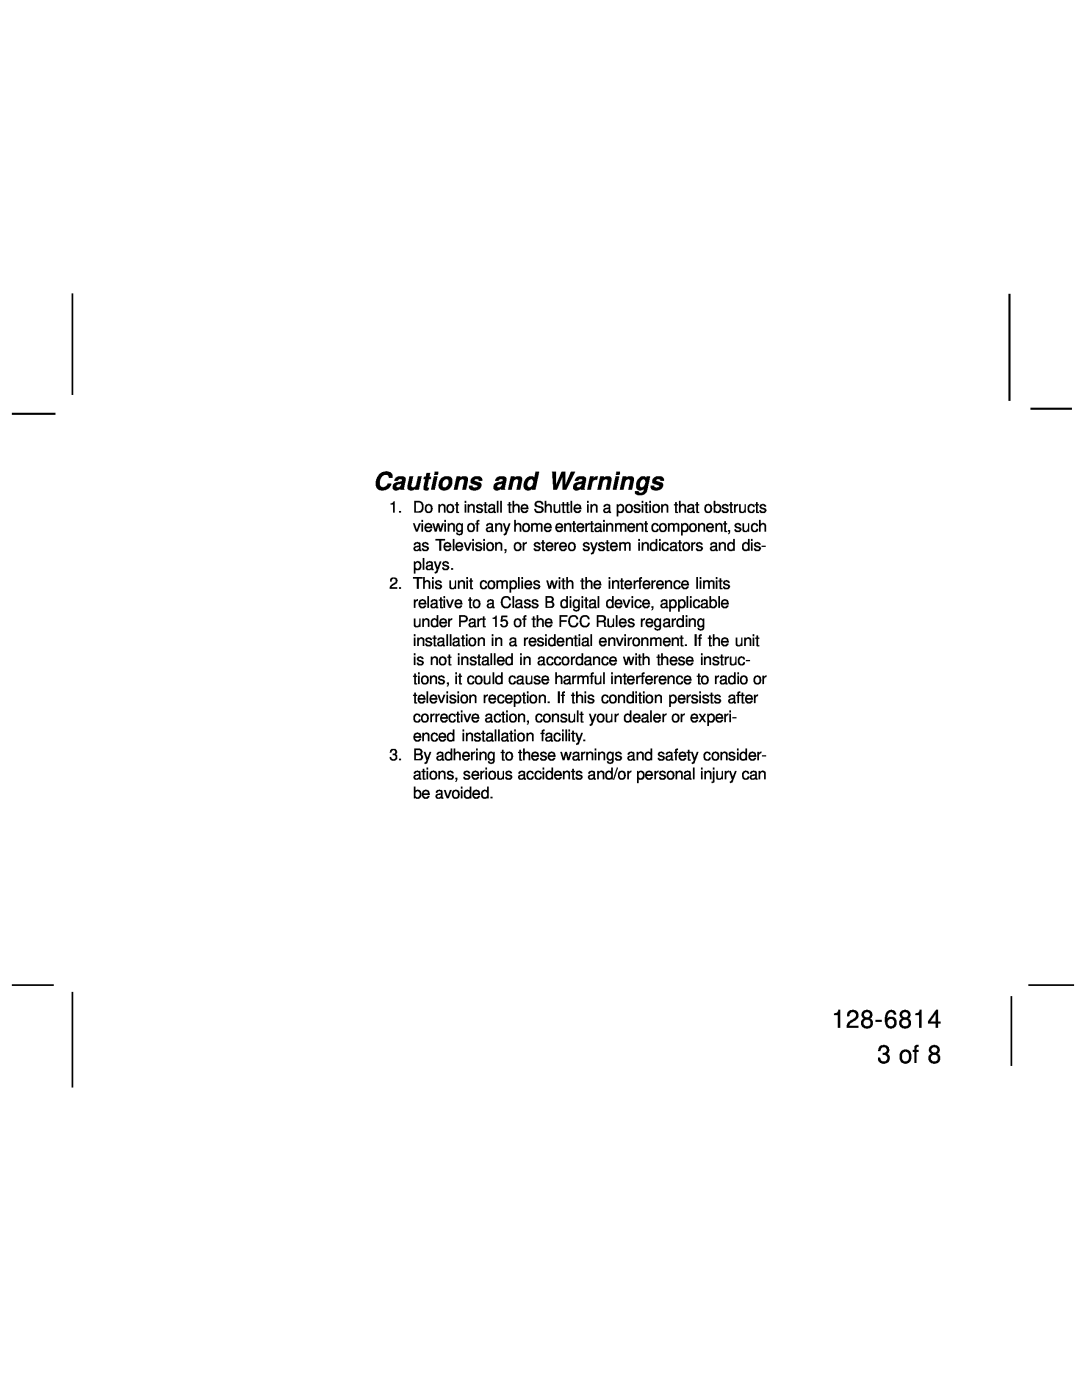 Audiovox SIR-HK1 manual Cautions and Warnings, 128-6814 3 of 